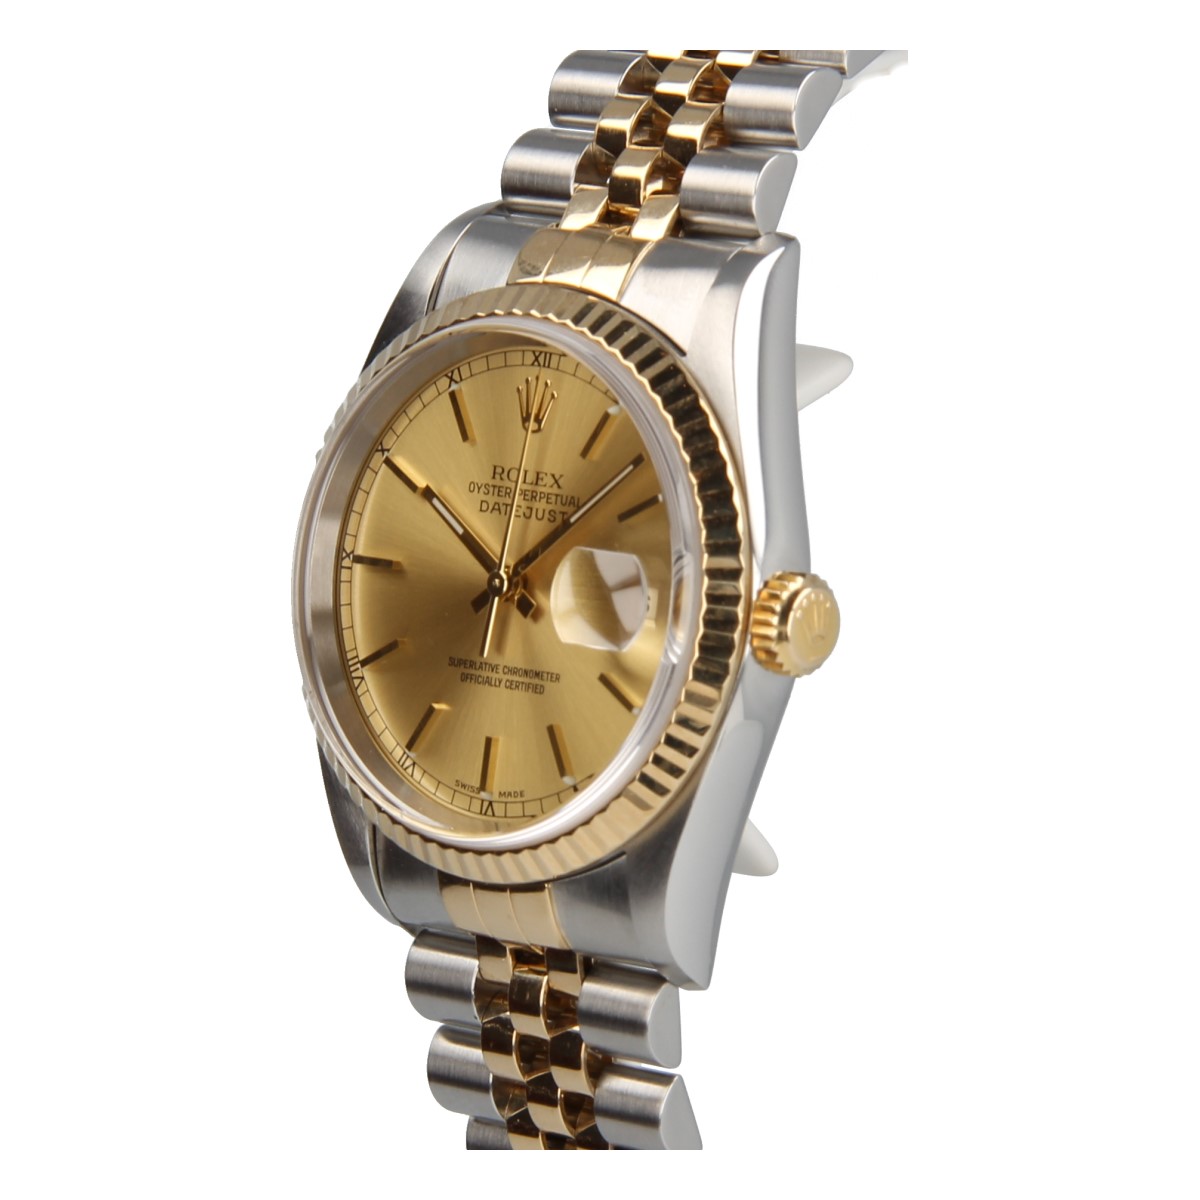 Rolex Datejust 36mm 16233 steel and 